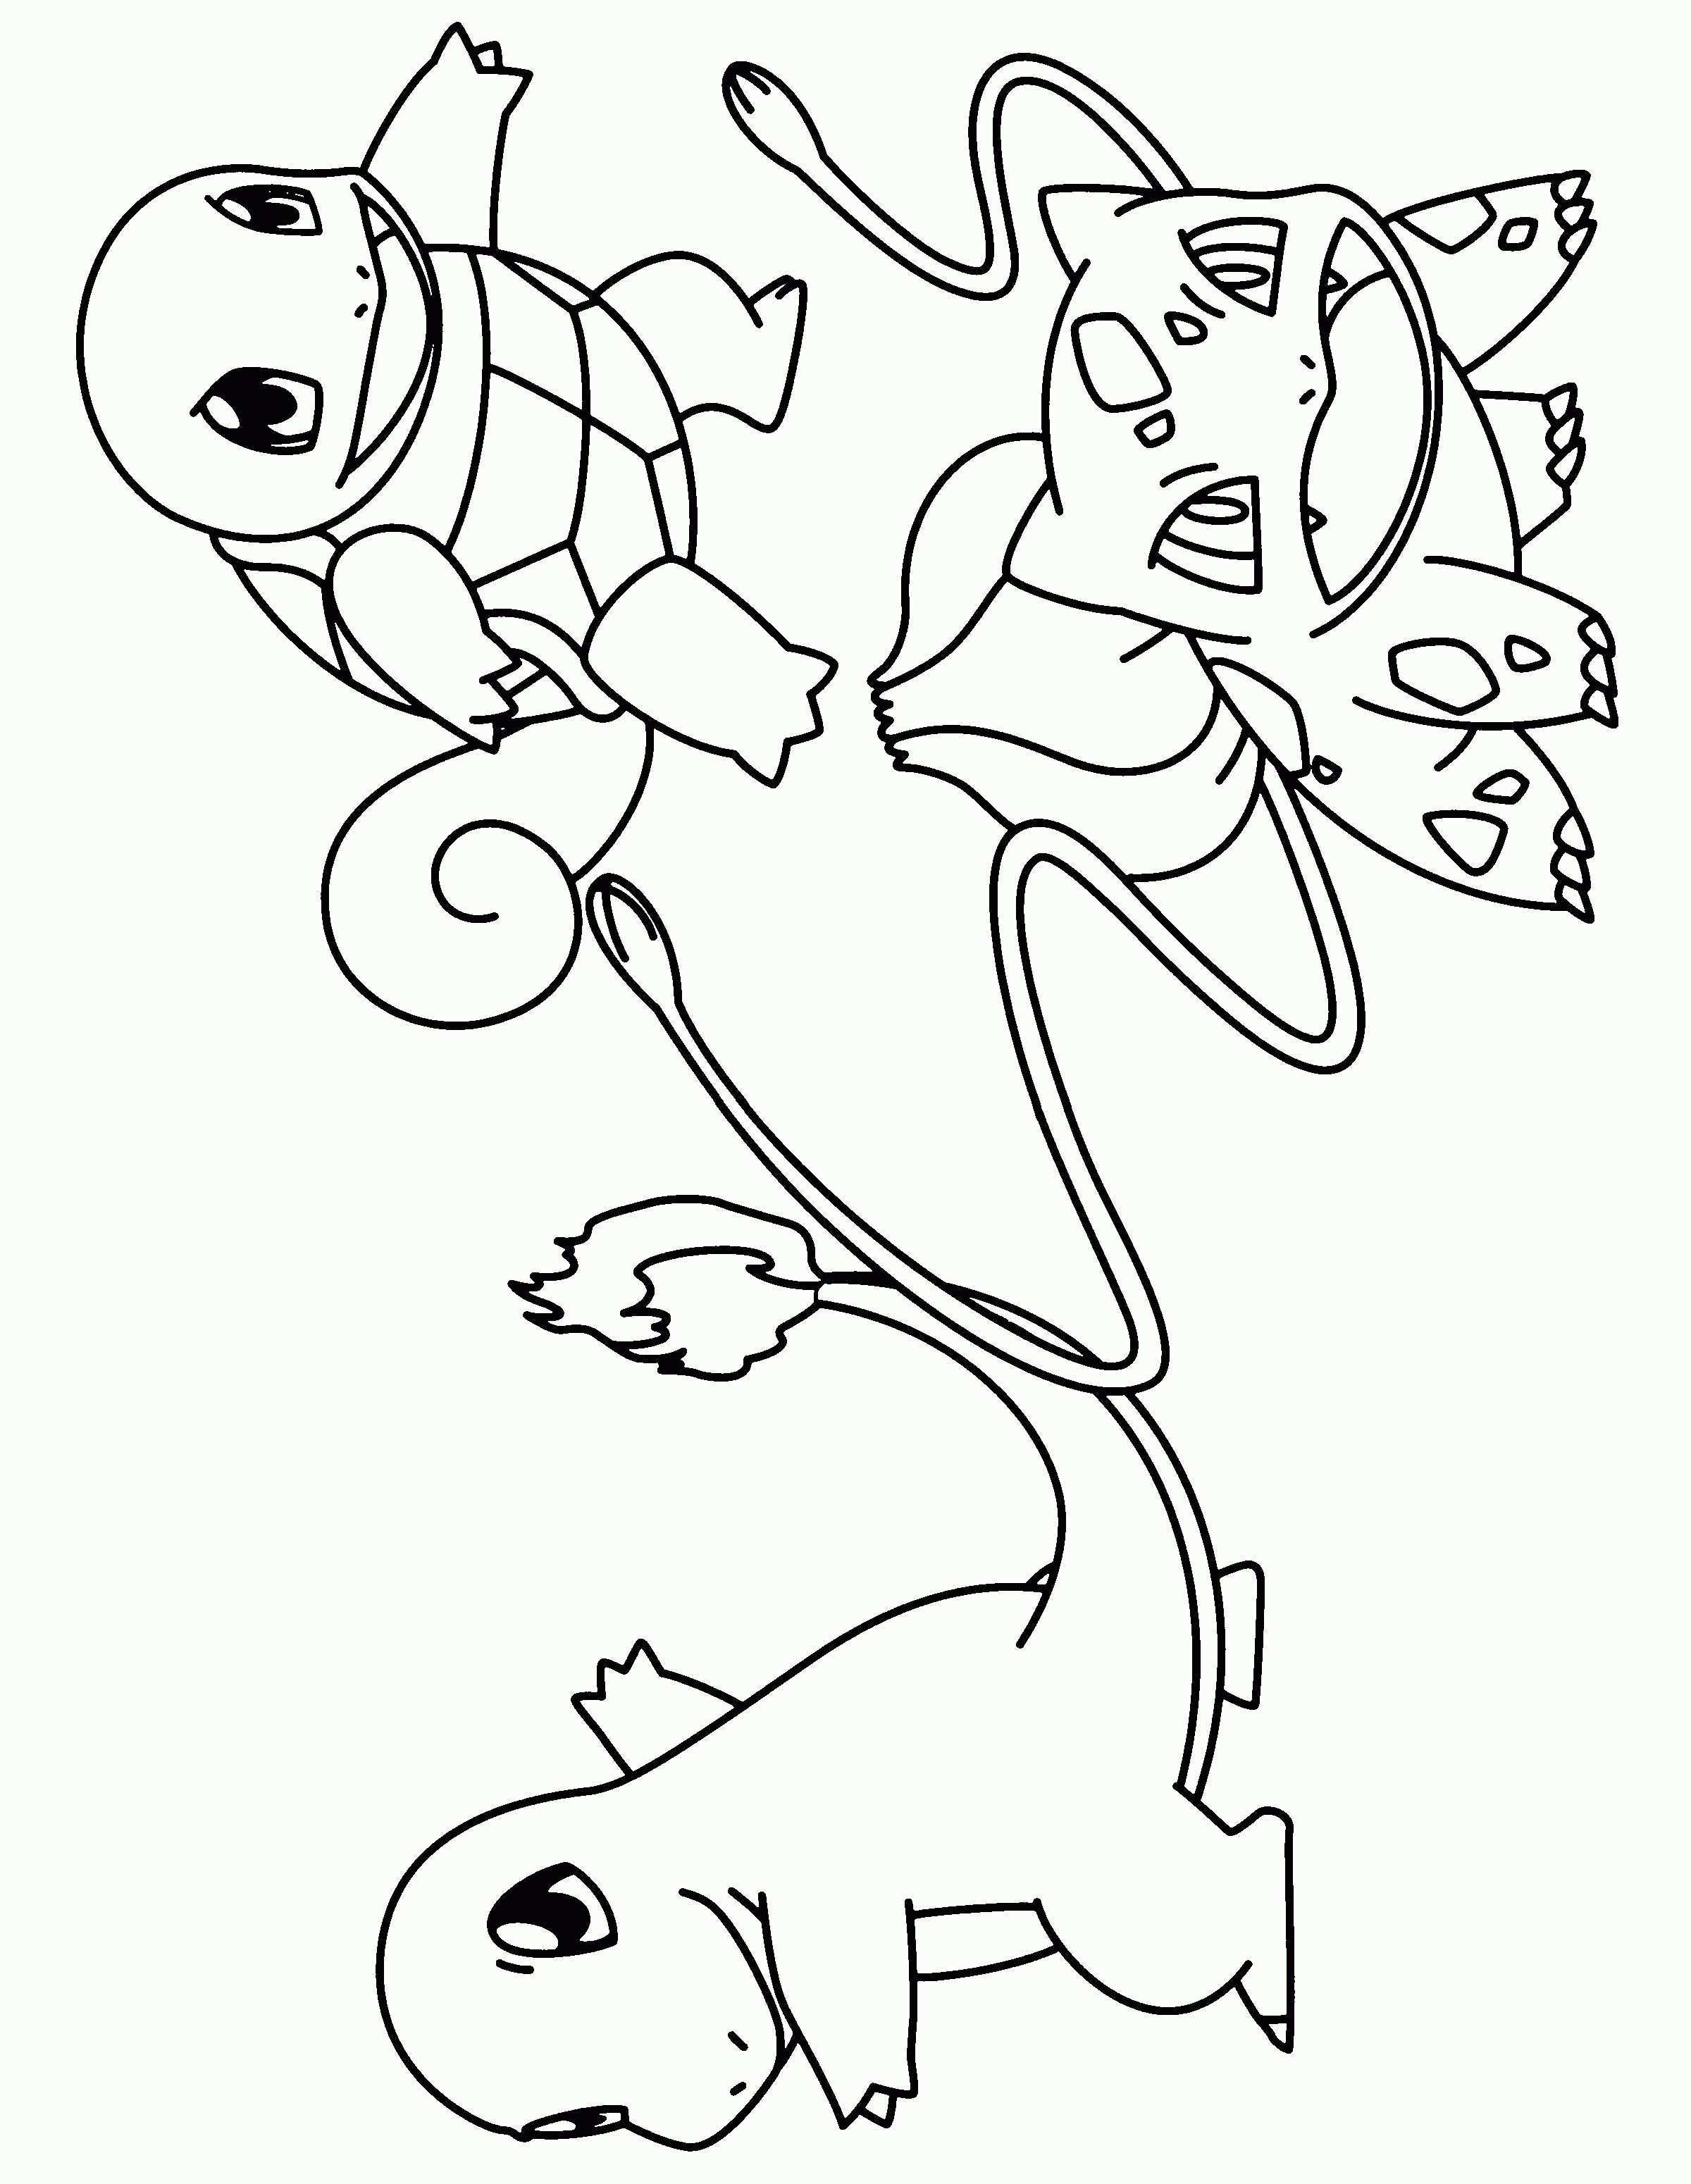 Squirtle Coloring Page With Pokemon Squirtle Coloring Pages Aecost Kleurplaten Pokemo